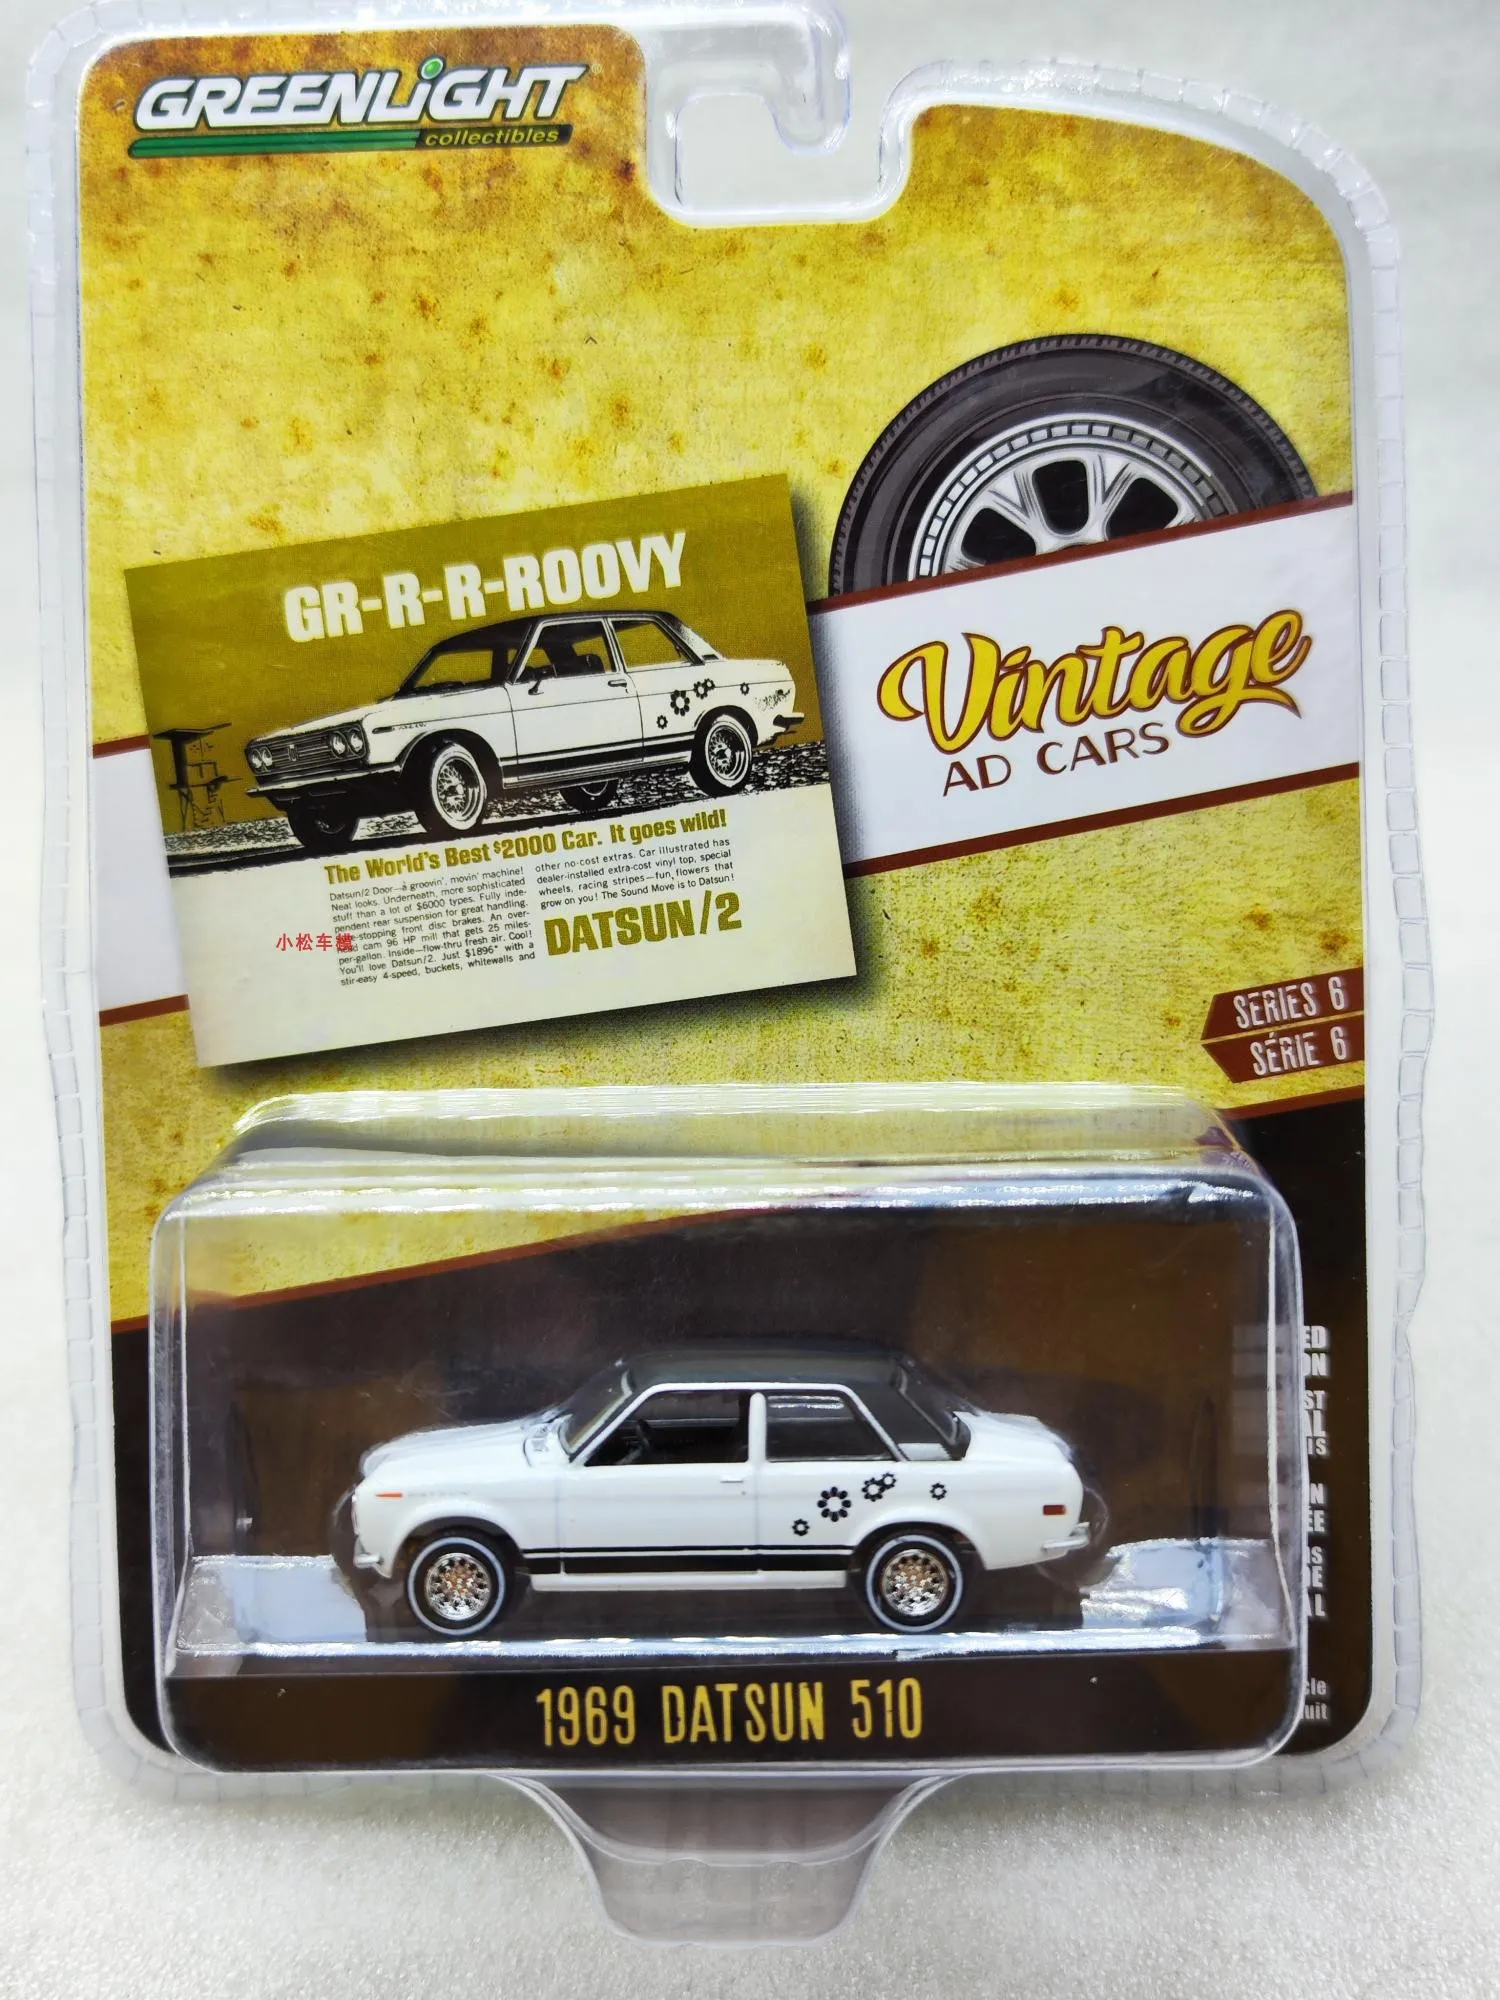 

1: 64 Retro Advertising Car Series 6-1969 Datsun 510- GR-R-R-R-ROOVY Collection of car models